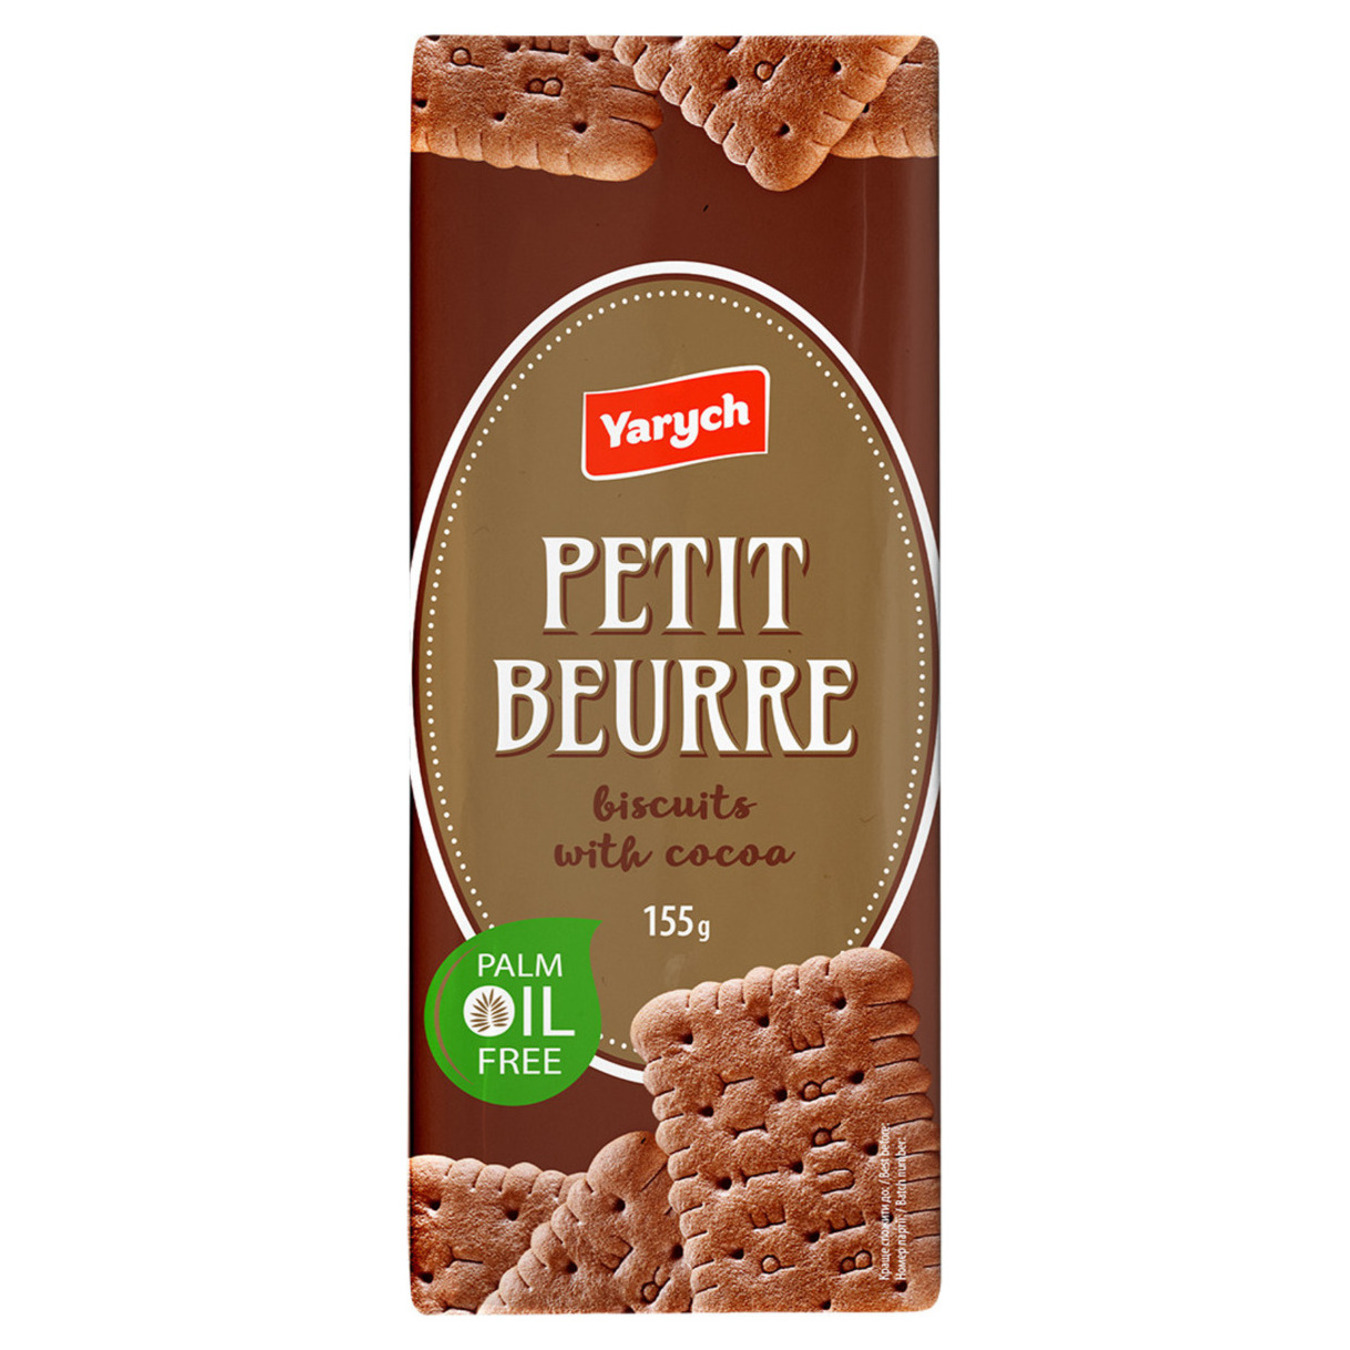 Yarych Petit Beurre Cookies with Cocoa 155g